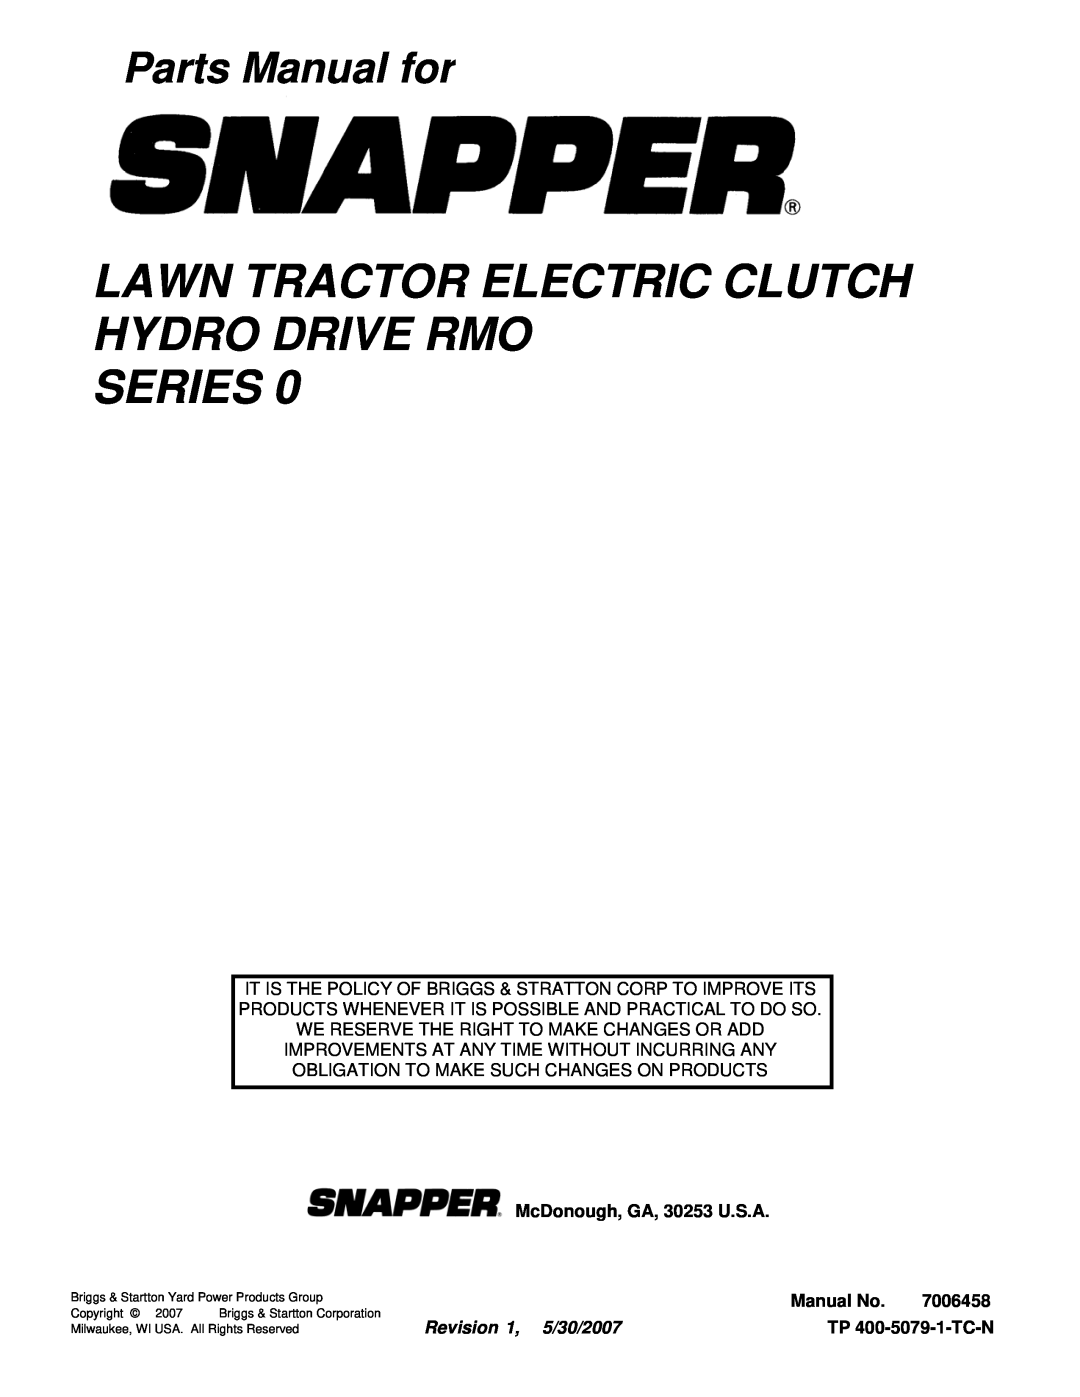 Snapper YT2050 (1694637) manual Lawn Tractor Electric Clutch Hydro Drive Rmo, Series, Parts Manual for, Manual No, 7006458 